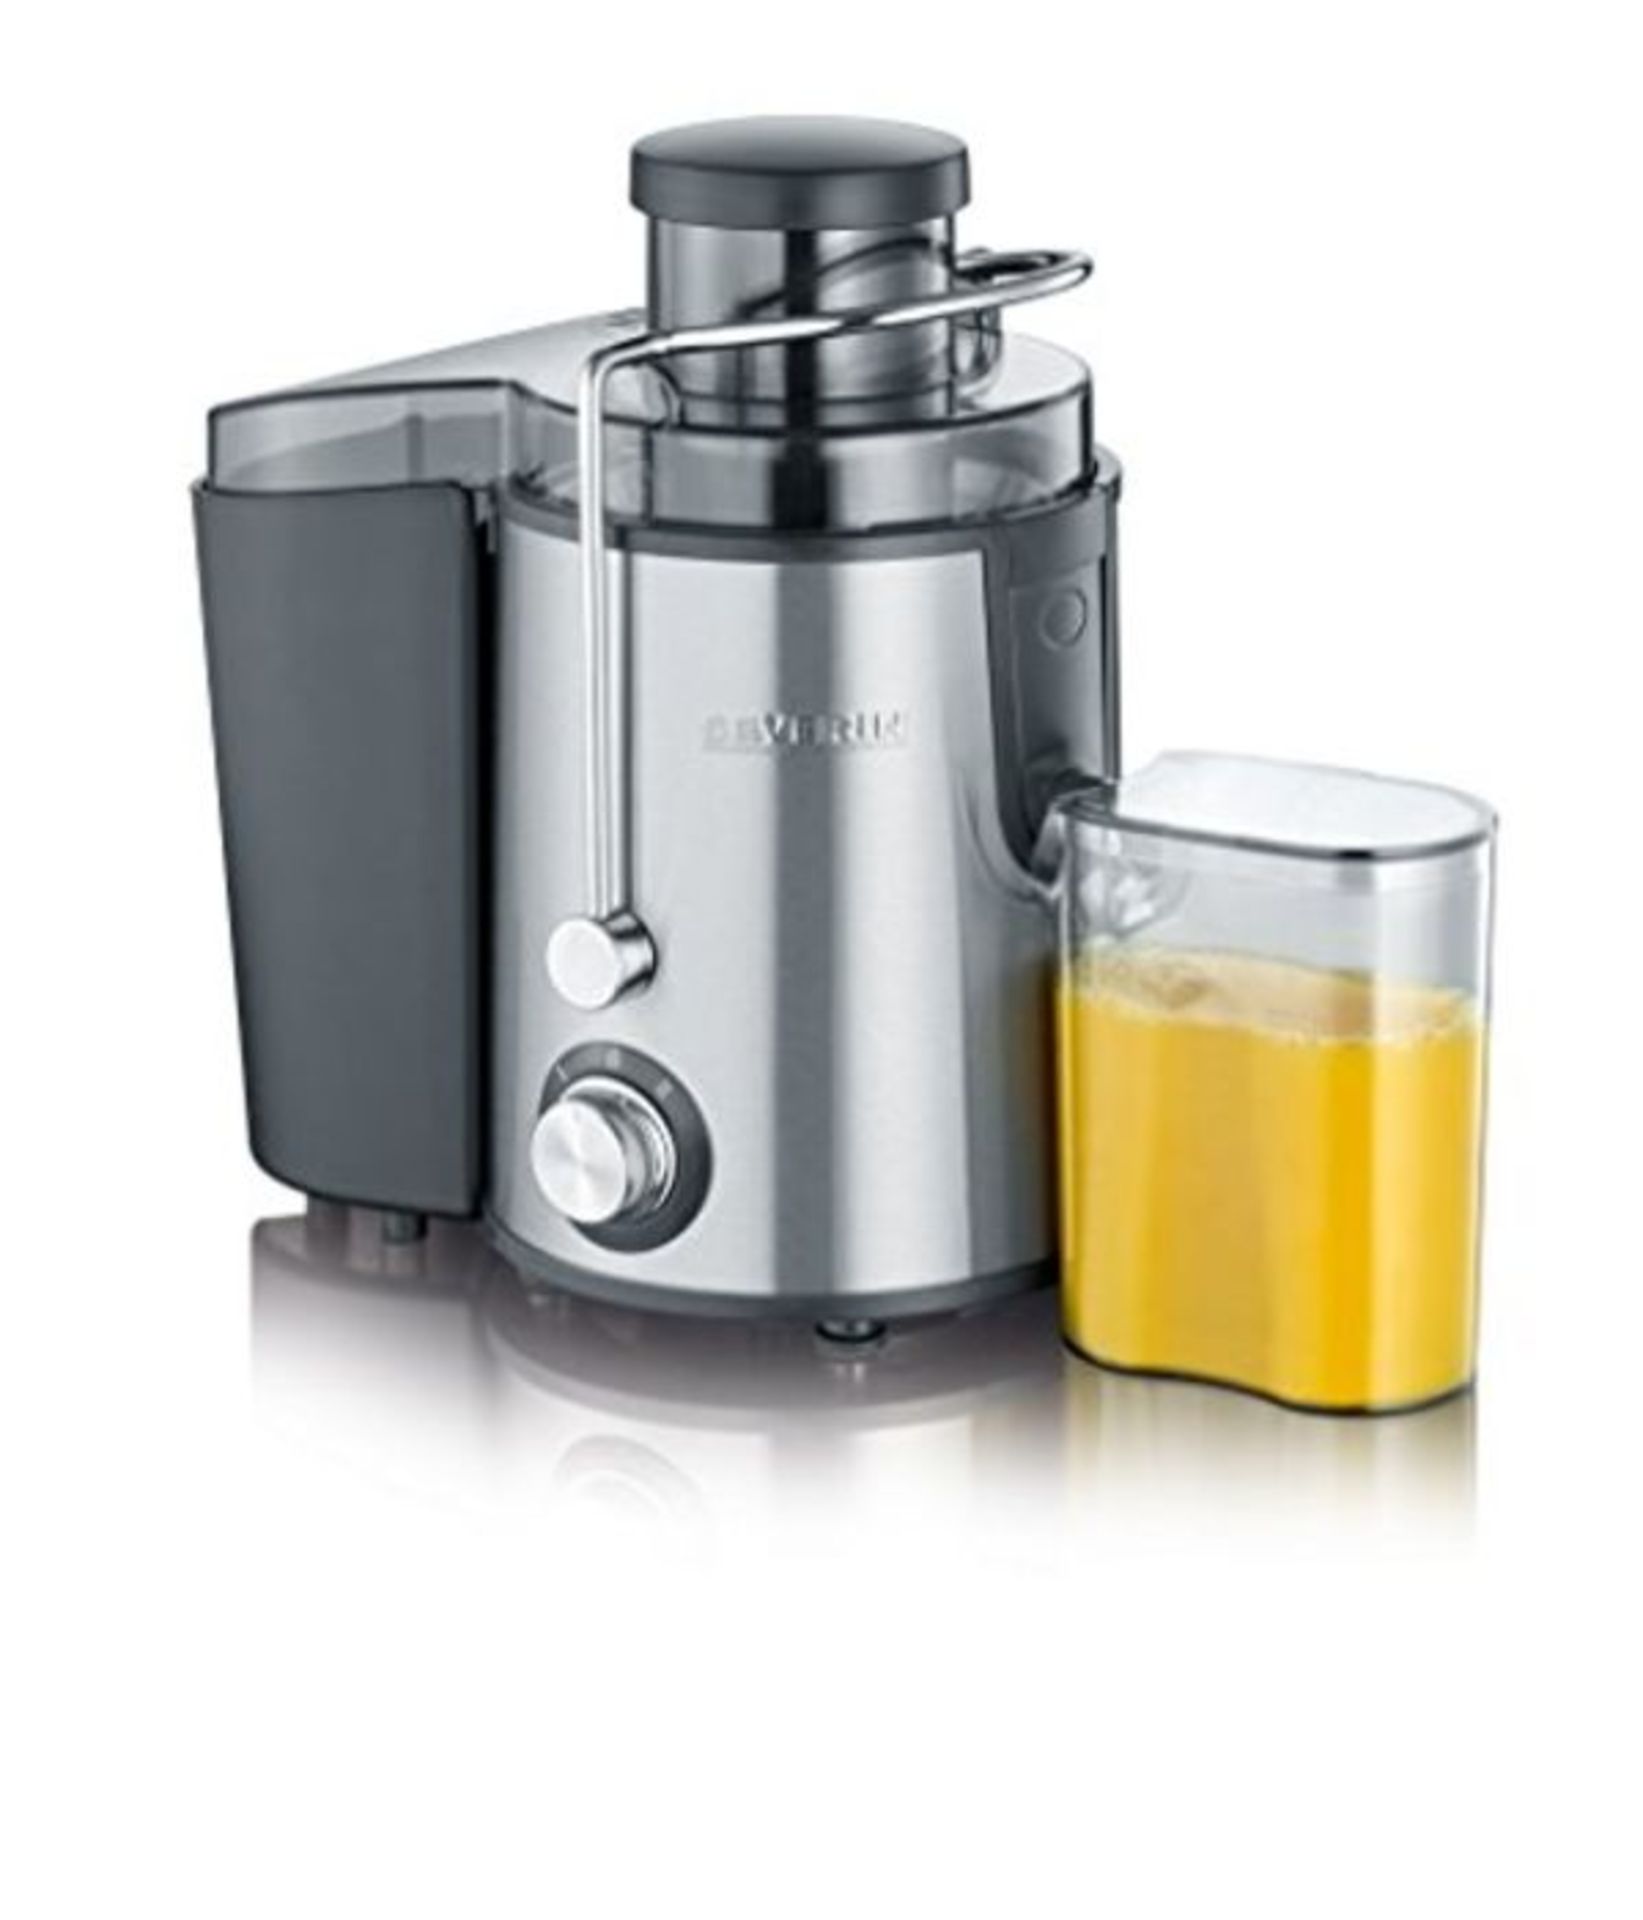 Severin Multi-Purpose Electric Juicer with 400 W of Power ES 3566, Brushed Stainless S